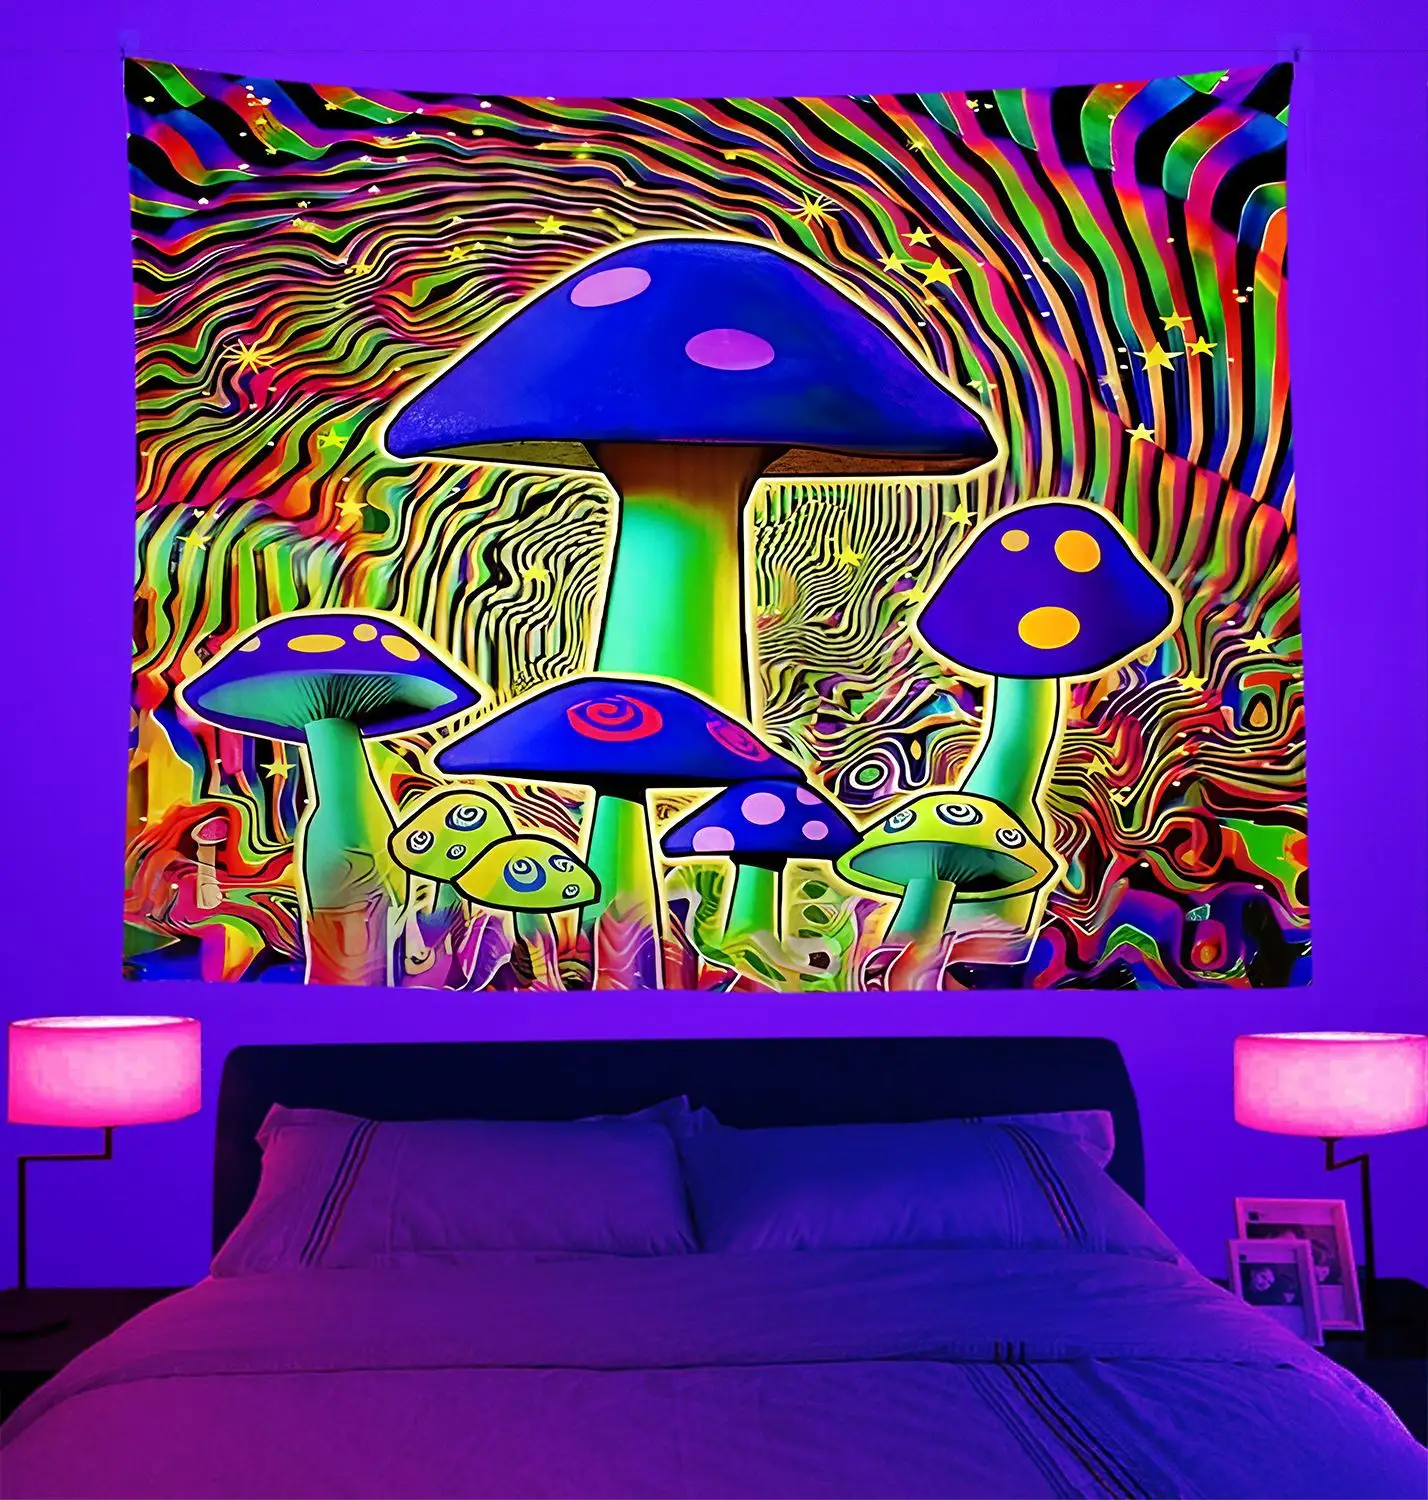 Mushroom Wall Hanging Tapestry Room Decor Aesthetic Wall Tapestry Luminous Hippie Psychedelic Fluorescent Tapestry